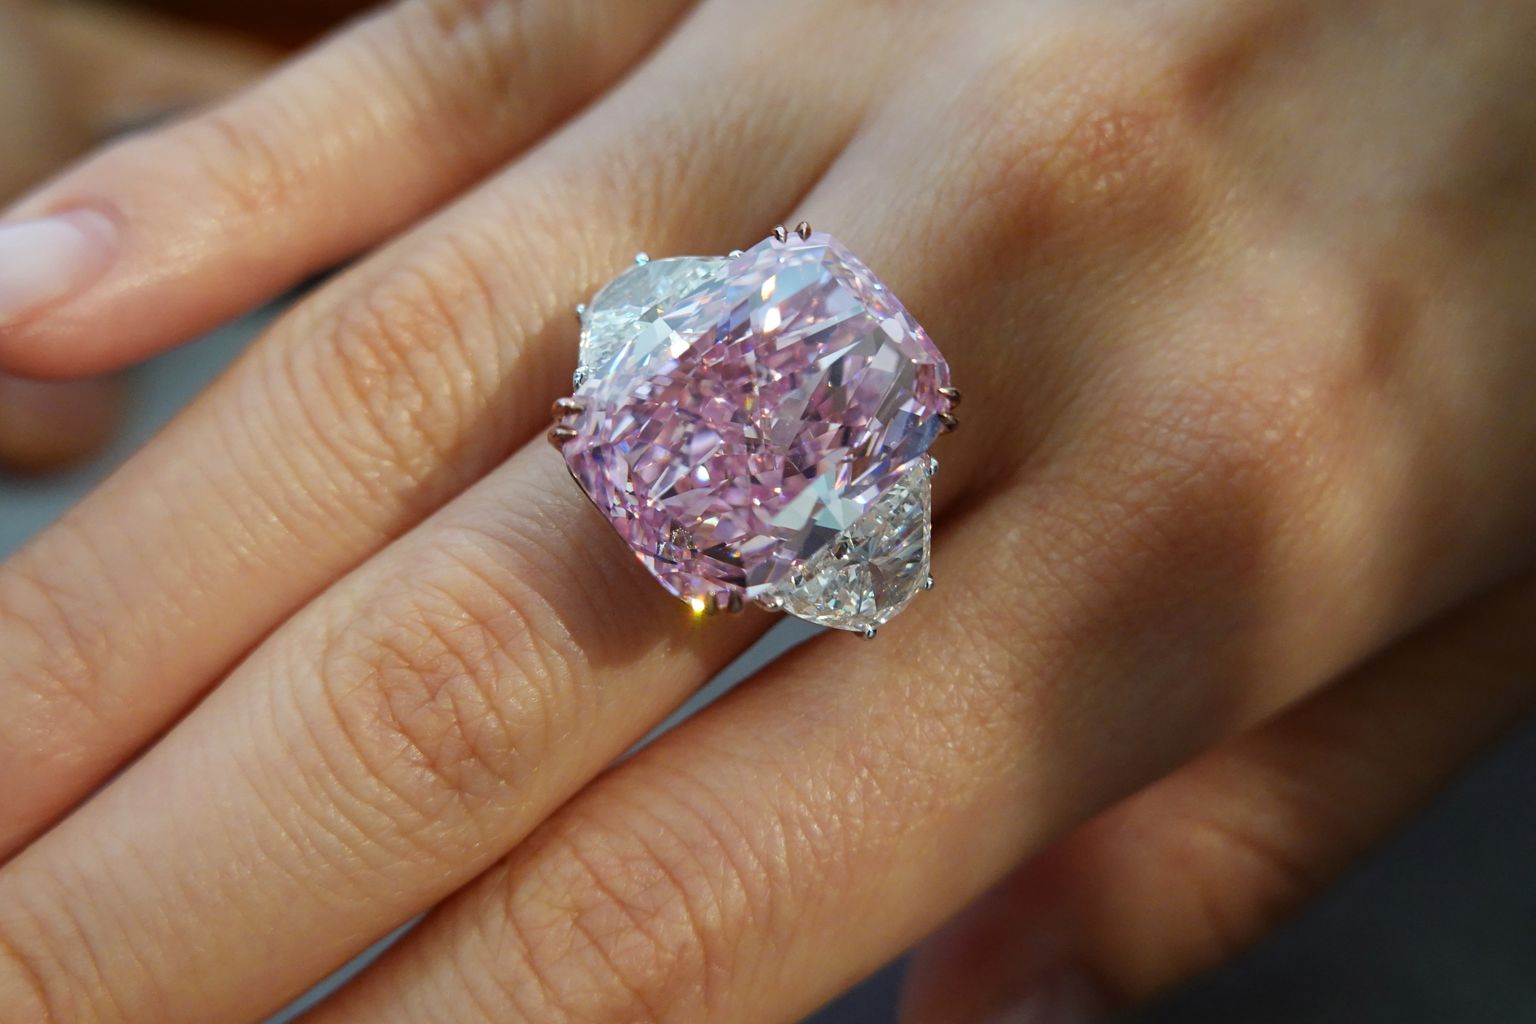 An employee poses with a 15.81 carat fancy vivid purple pink diamond ring, which is called The Sakura Diamond, during a preview at Christie’s ahead of the upcoming auction, in Hong Kong, China May 6, 2021. REUTERS/Joyce Zhou